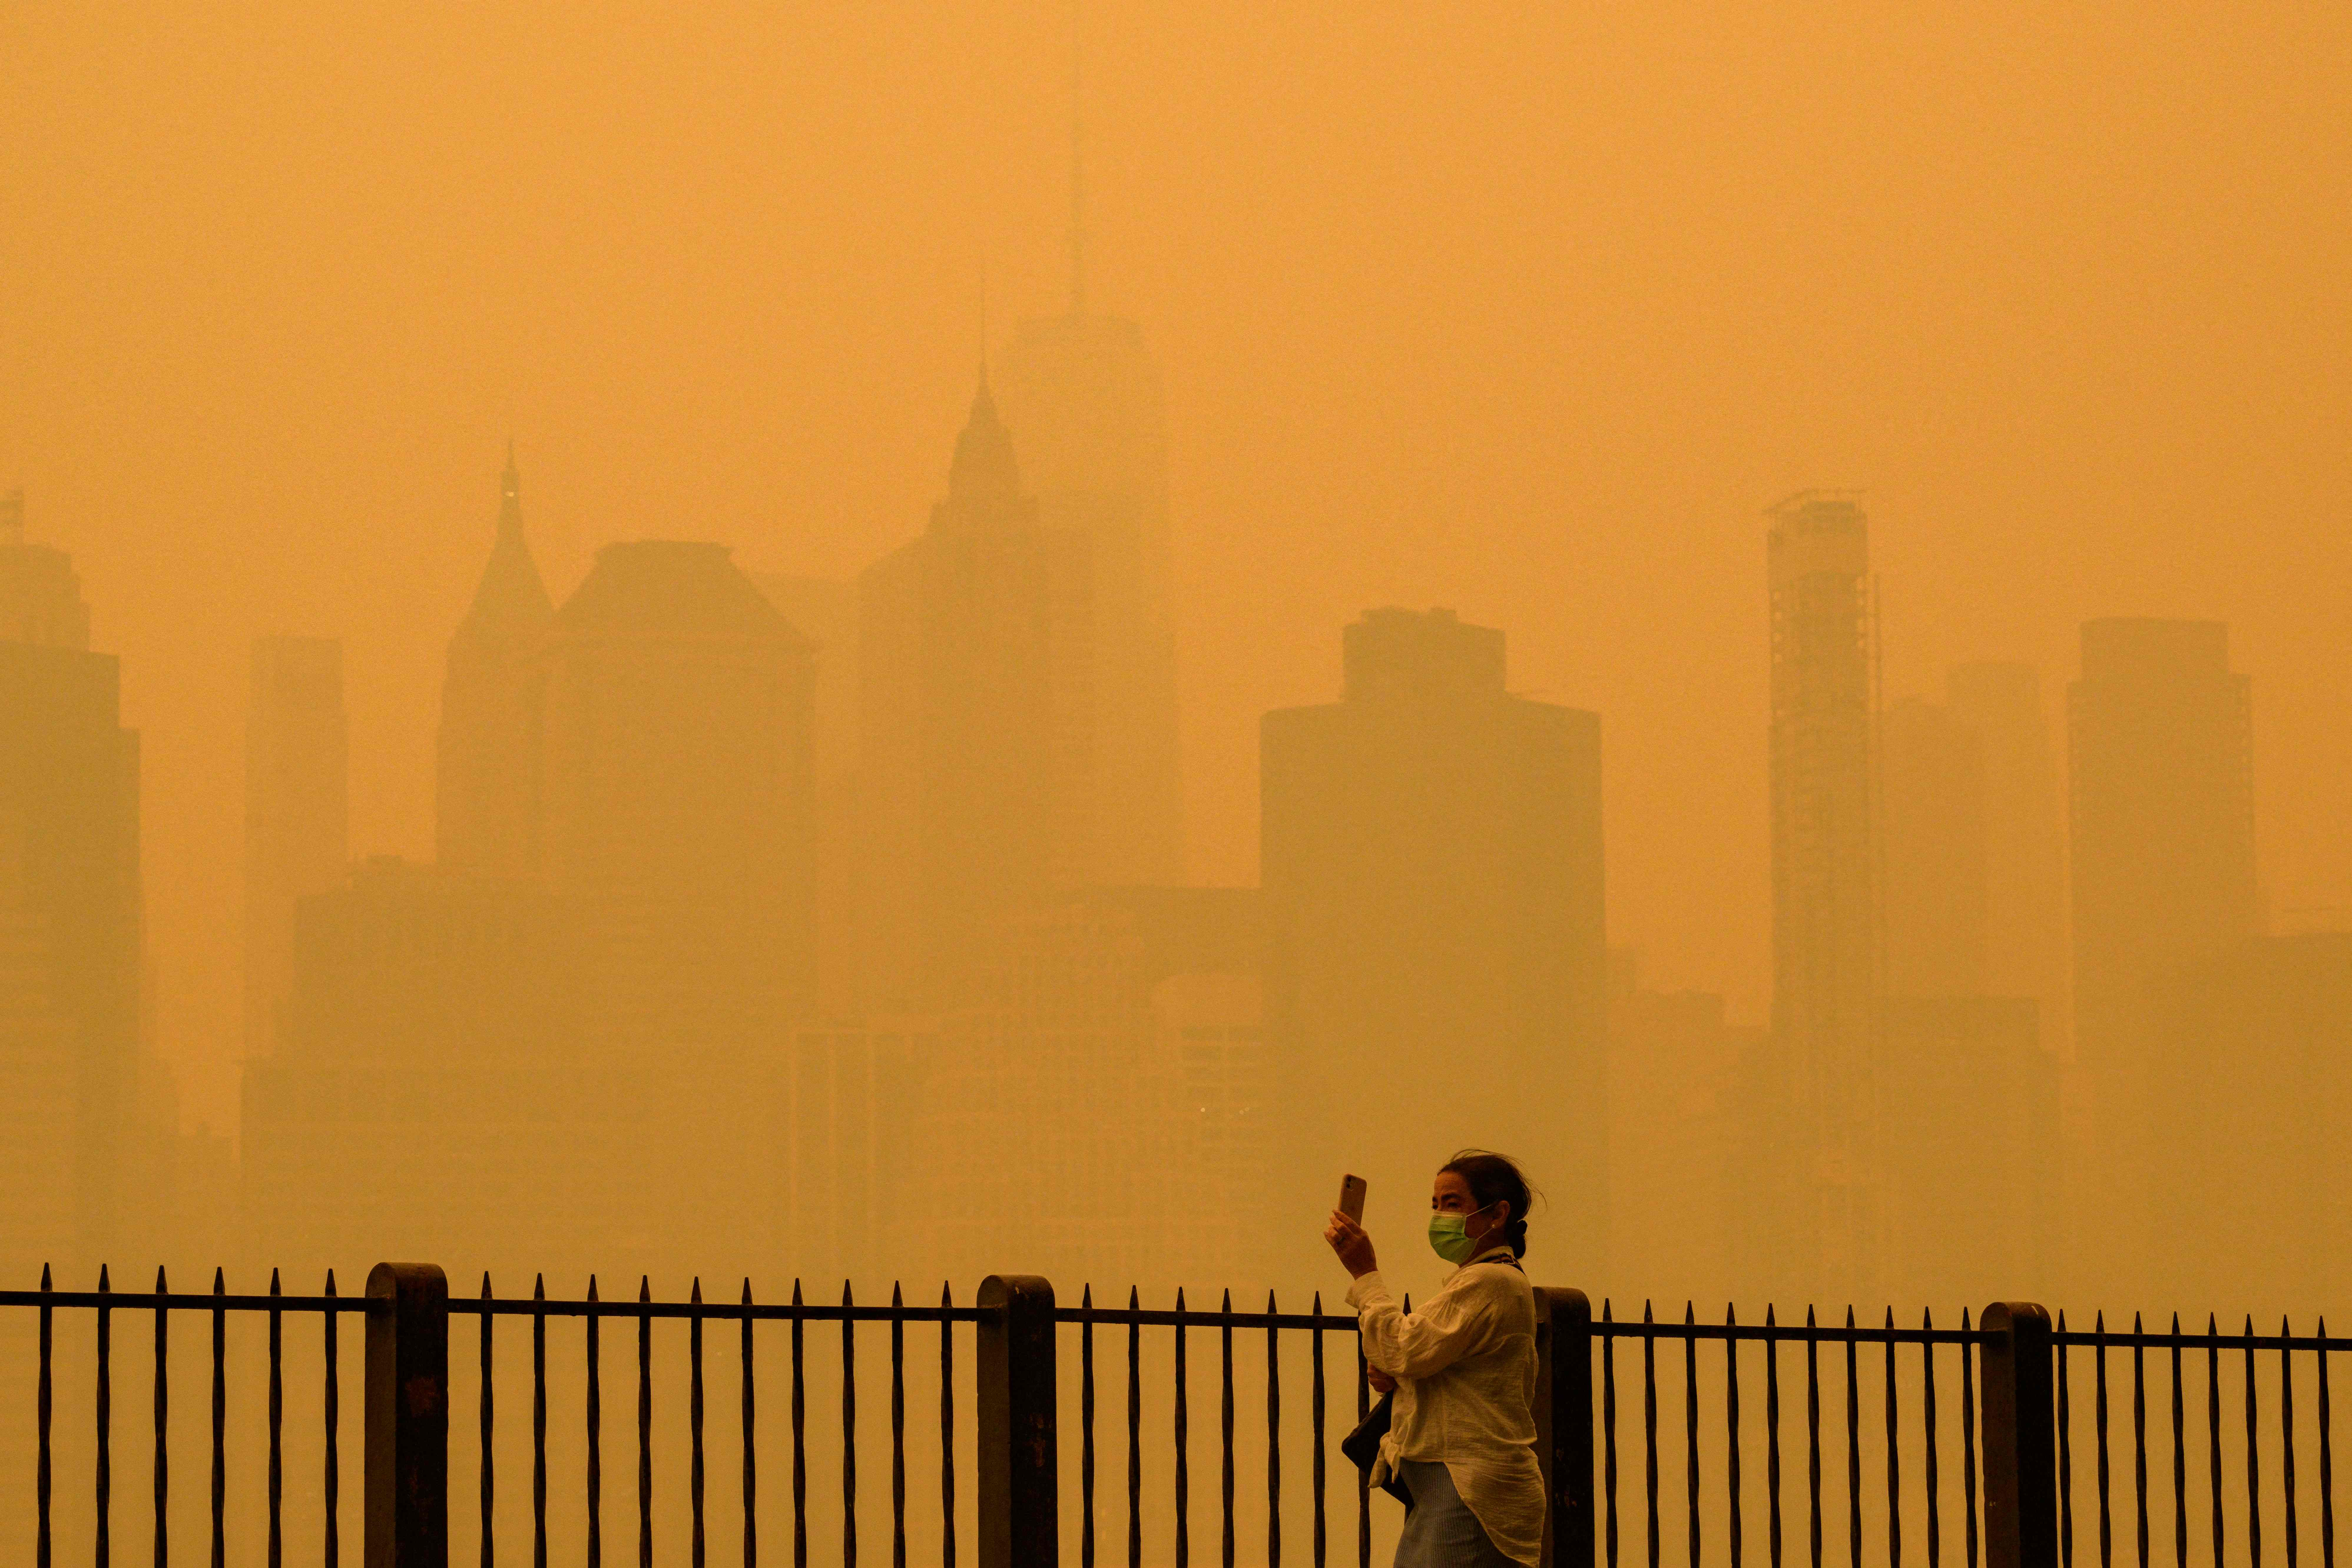 New York’s skyline turned orange in June due to Canadian wildfire smoke